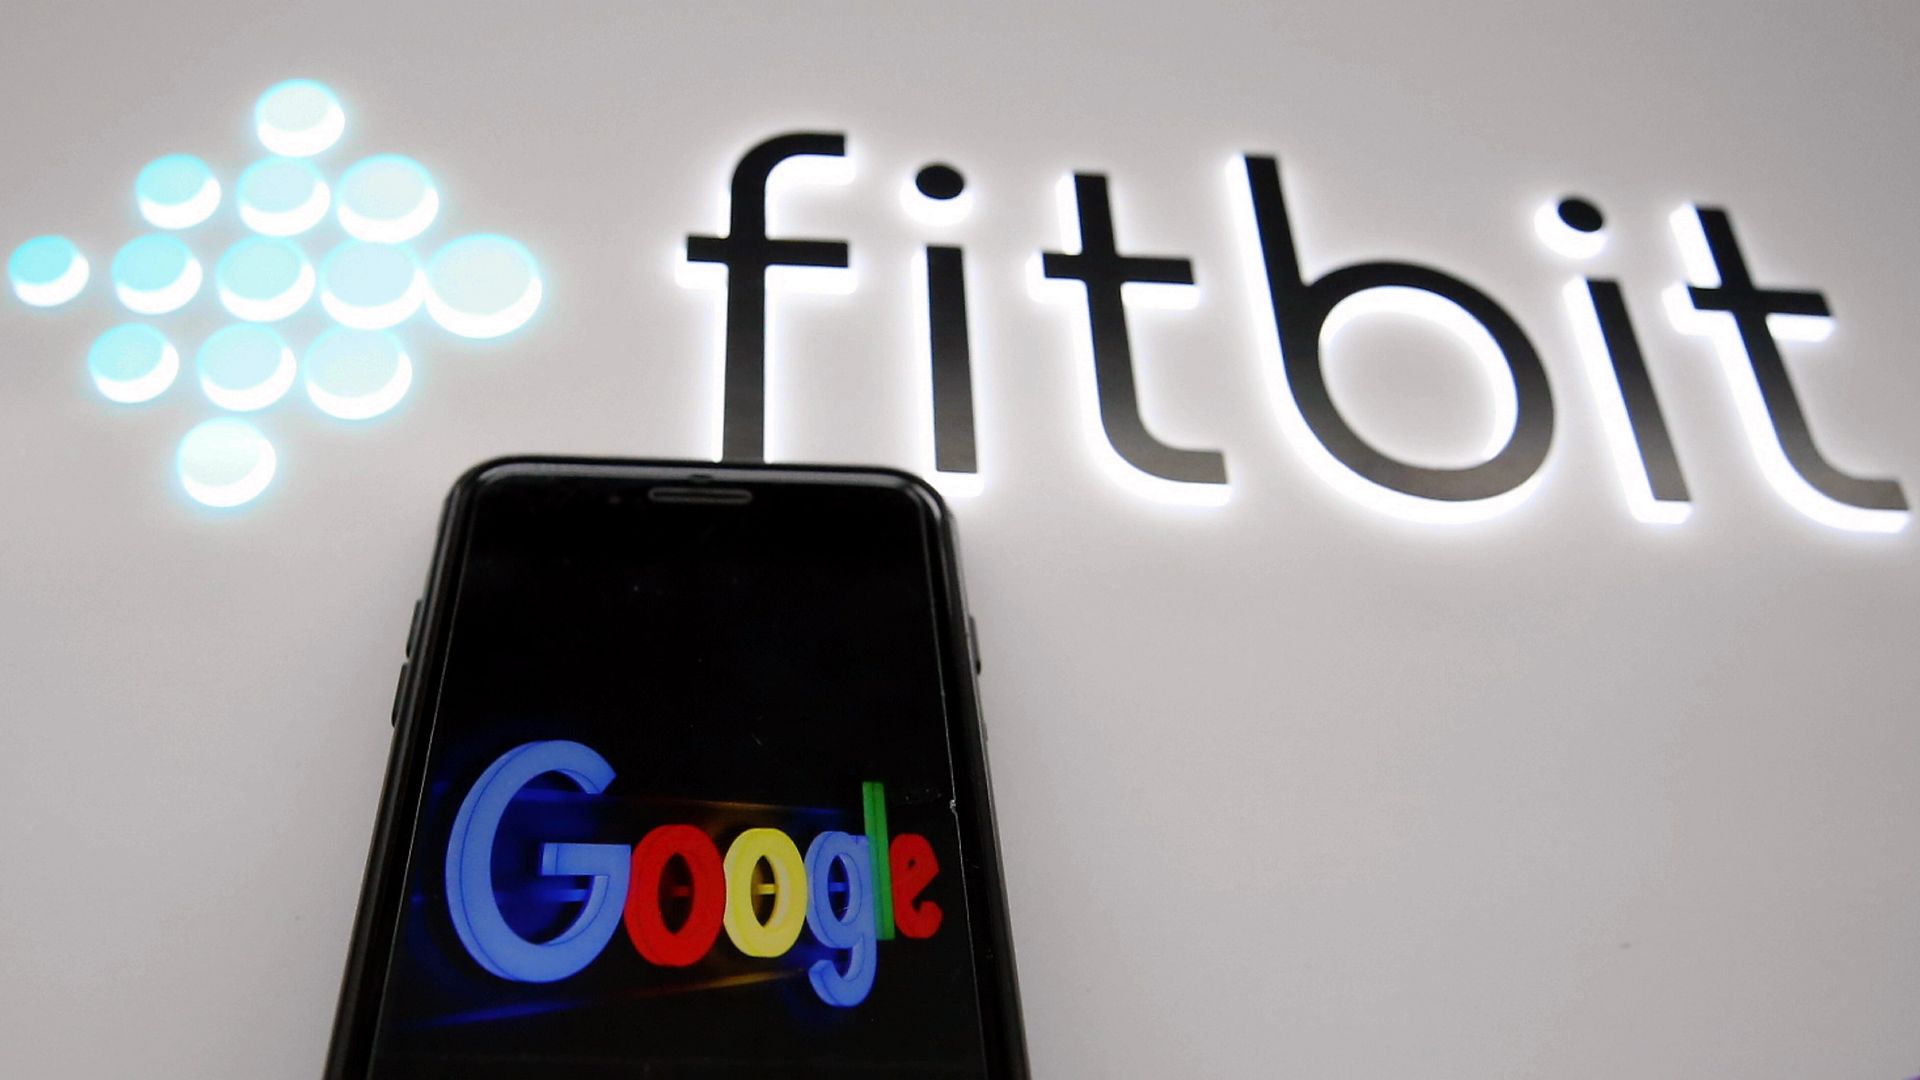 A photo of a smartphone displaying the Google logo, with an illuminated Fitbit sign behind it